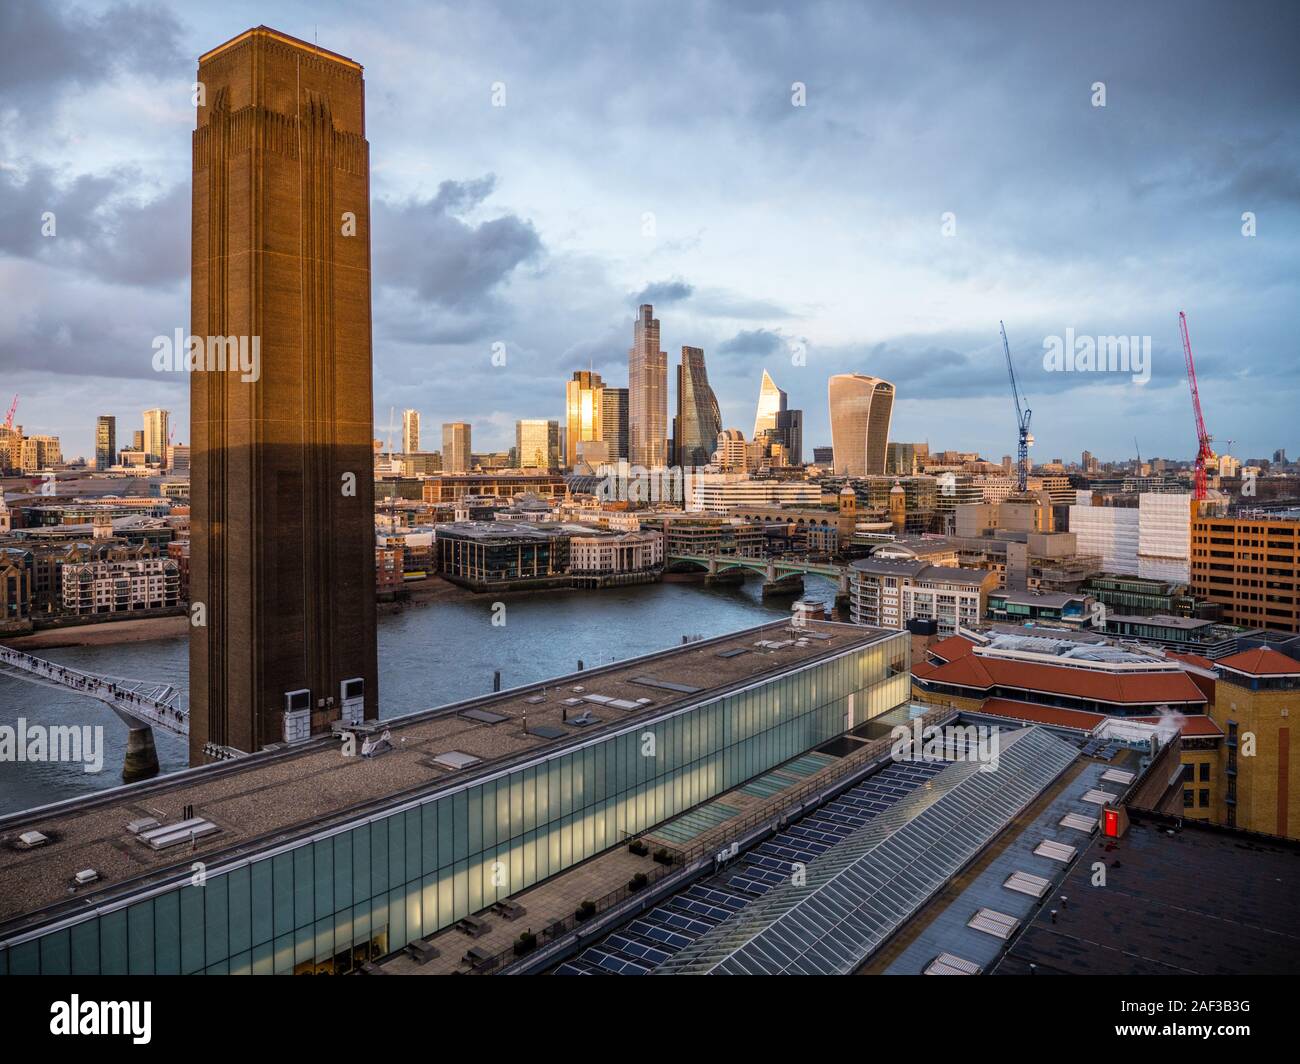 Roof of Tate Modern, River Thames, City of London, Evening, London, England, UK, GB. Stock Photo